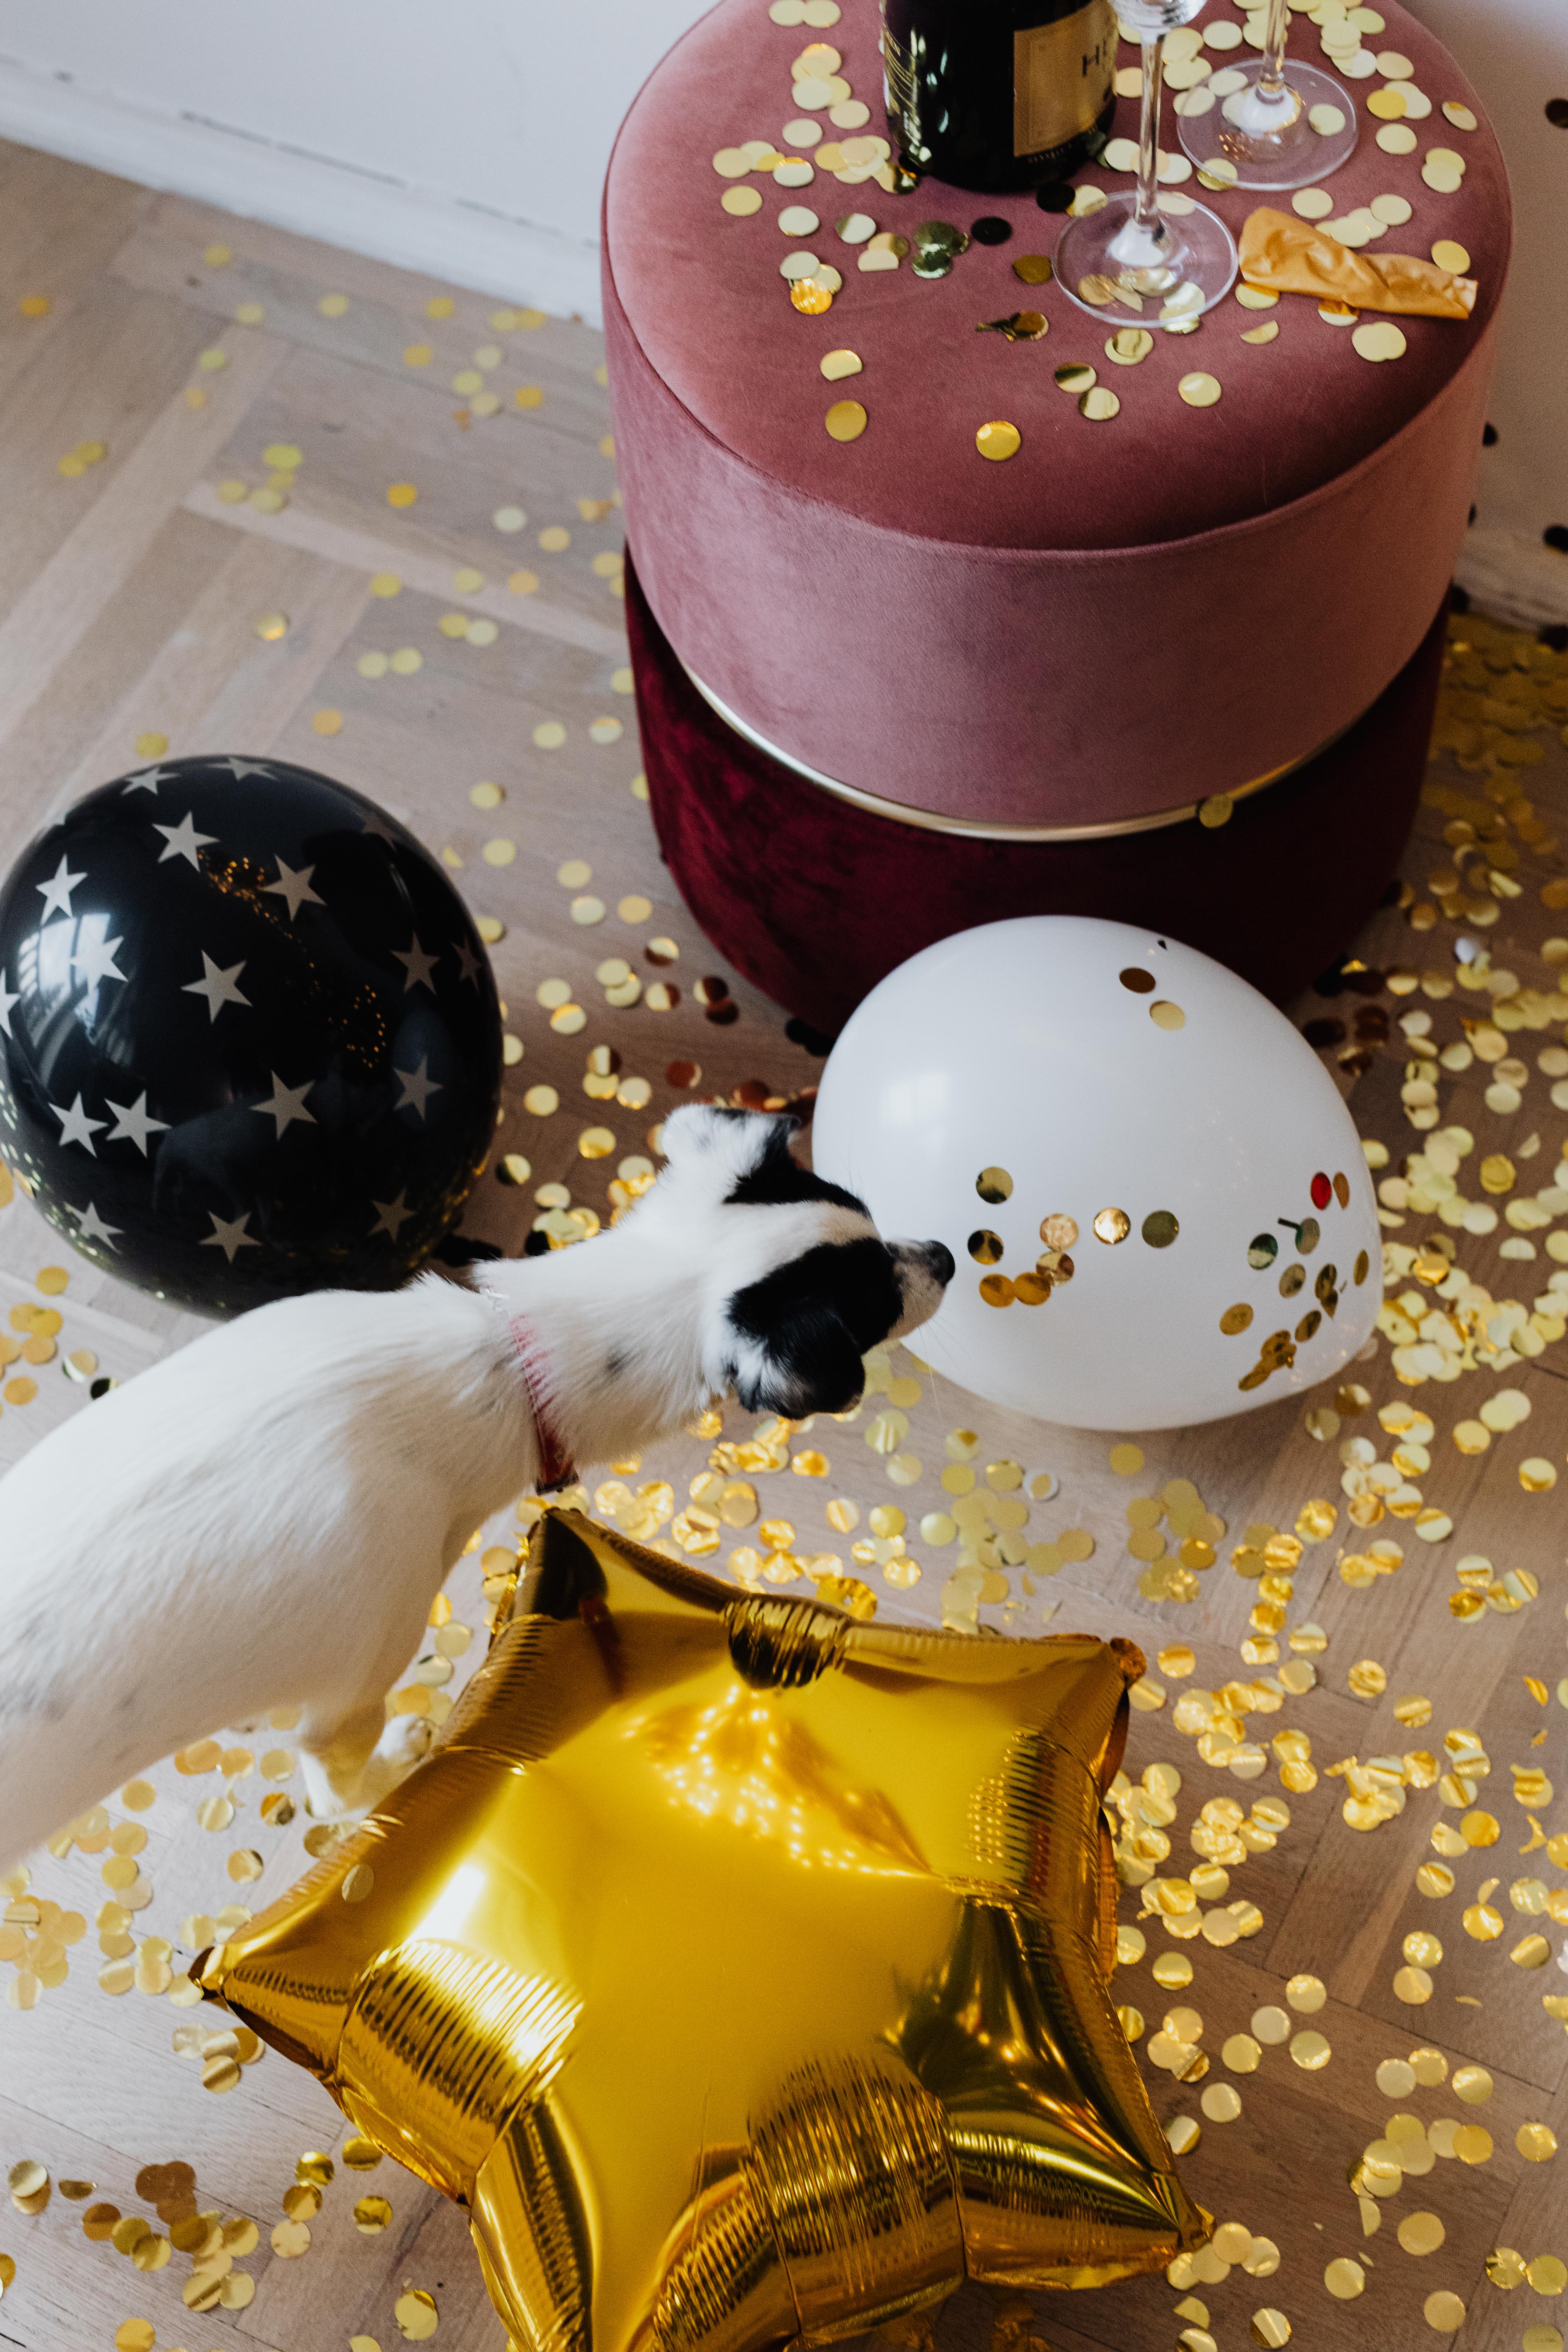 New Year's Eve - Gold balloons in the shape of 2020, confetti, champagne